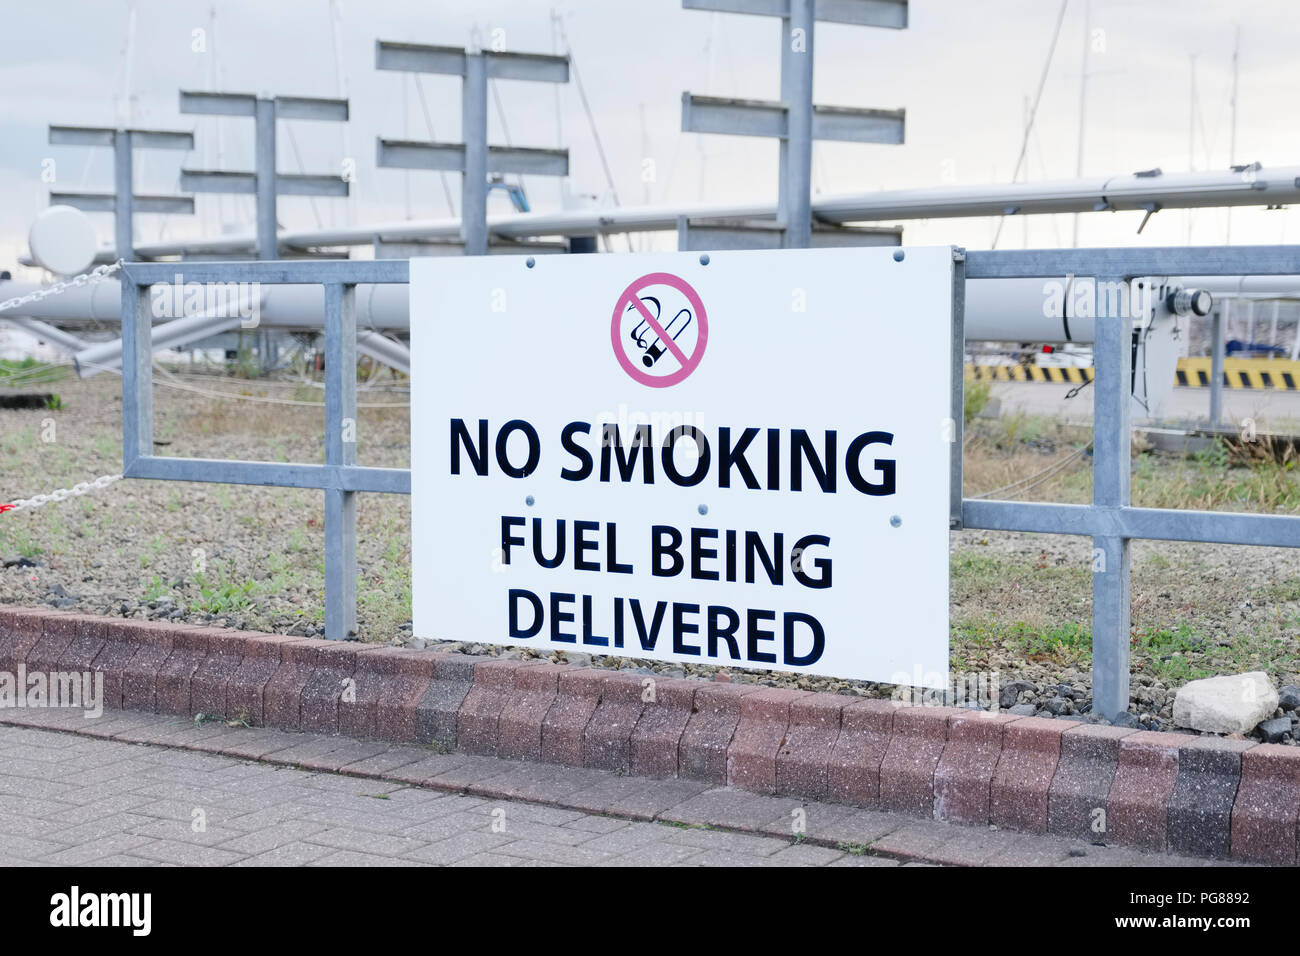 Fuel being delivered no smoking sign at oil and gas refinery Stock Photo